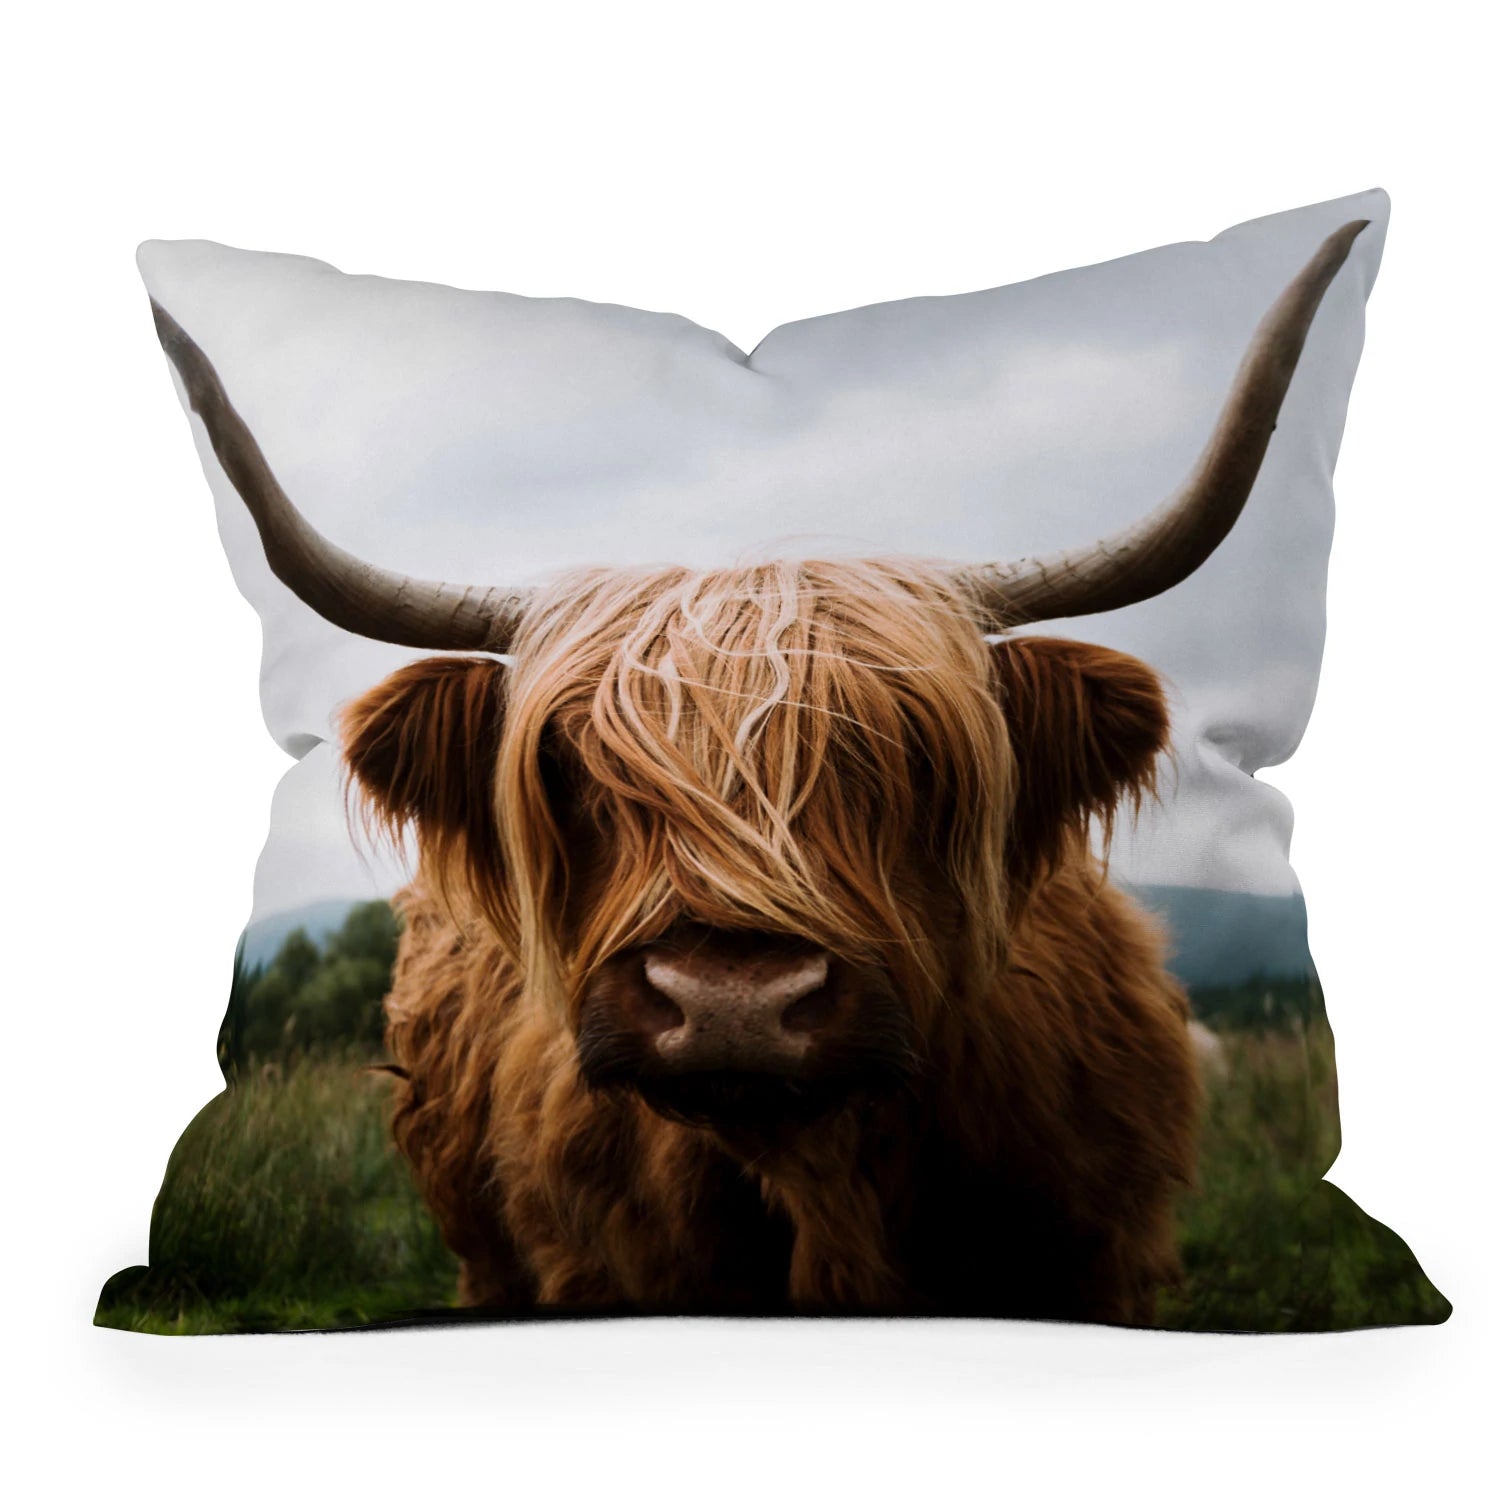 Scottish Highland Cattle  PILLOW Choice of Sizes - accent throw pill, accent throw pillow, boards, cow, cowboys, cowboyspillow, decor, highland, home, home decor, homedecor, pillow, pillows, ranch, ranch horse, ranchhome, rodeo, rodeohome, southwestern, southwesterndecor, southwesternhomedecor, throw, throw pillow, throw pillows, western, western decor, western home, westerndecor, westernhome, westernhomedecor - scottish highland cattle - Baha Ranch Western Wear